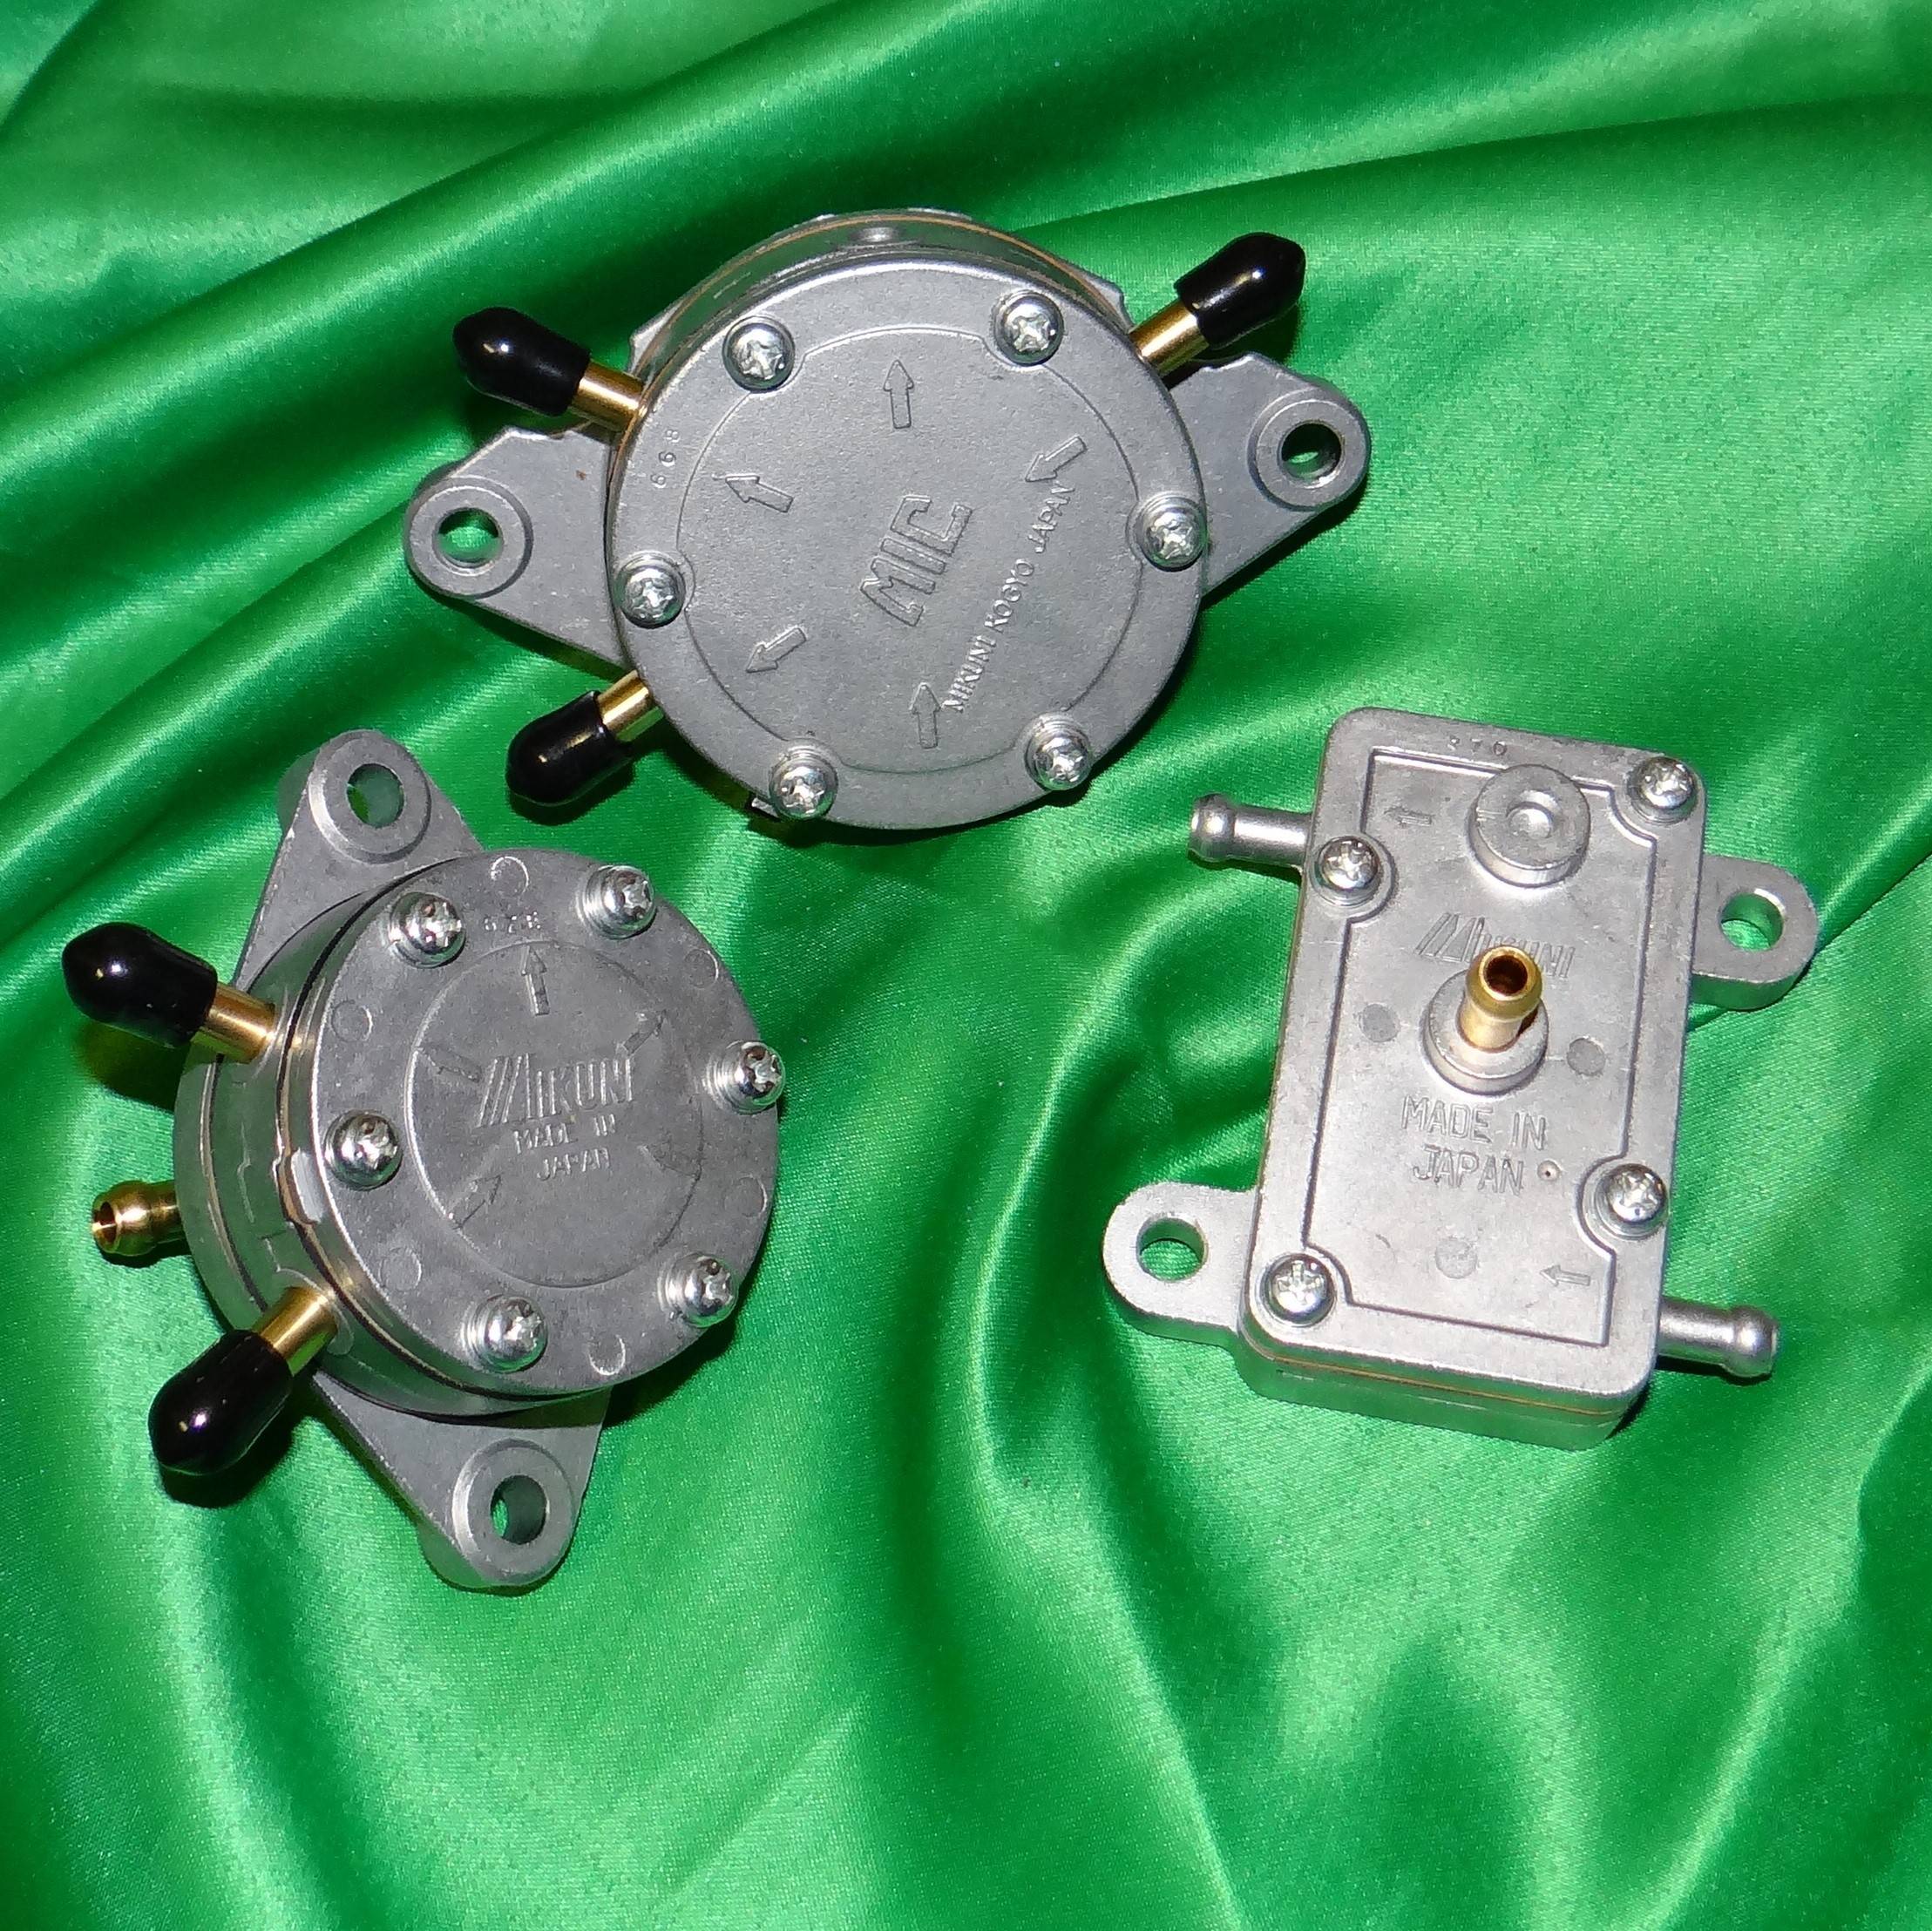 Fuel tap and pump for KAWASAKI 4-stroke engines